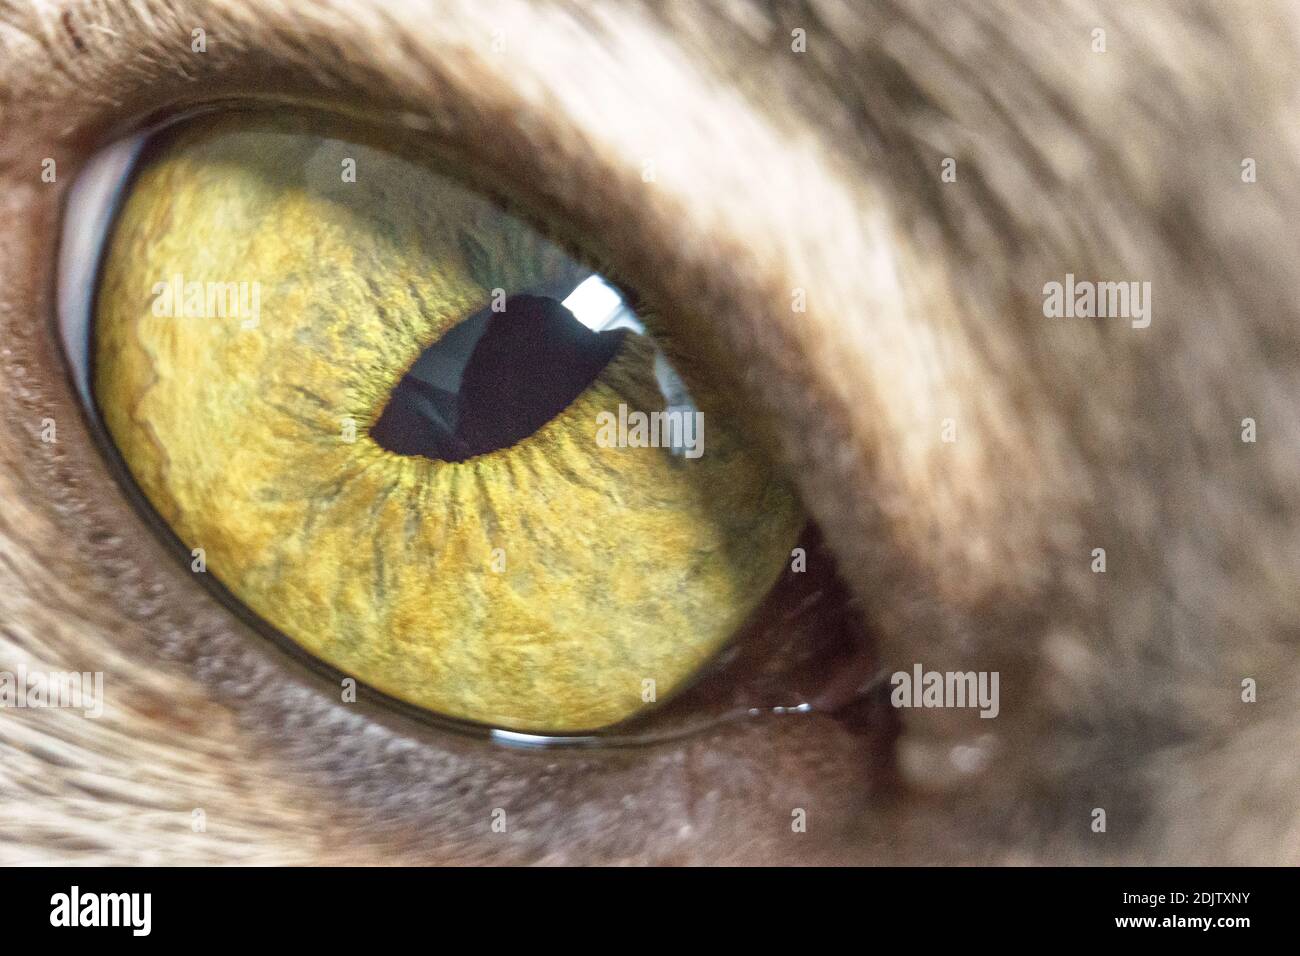 Detail of a yellow cat eye Stock Photo